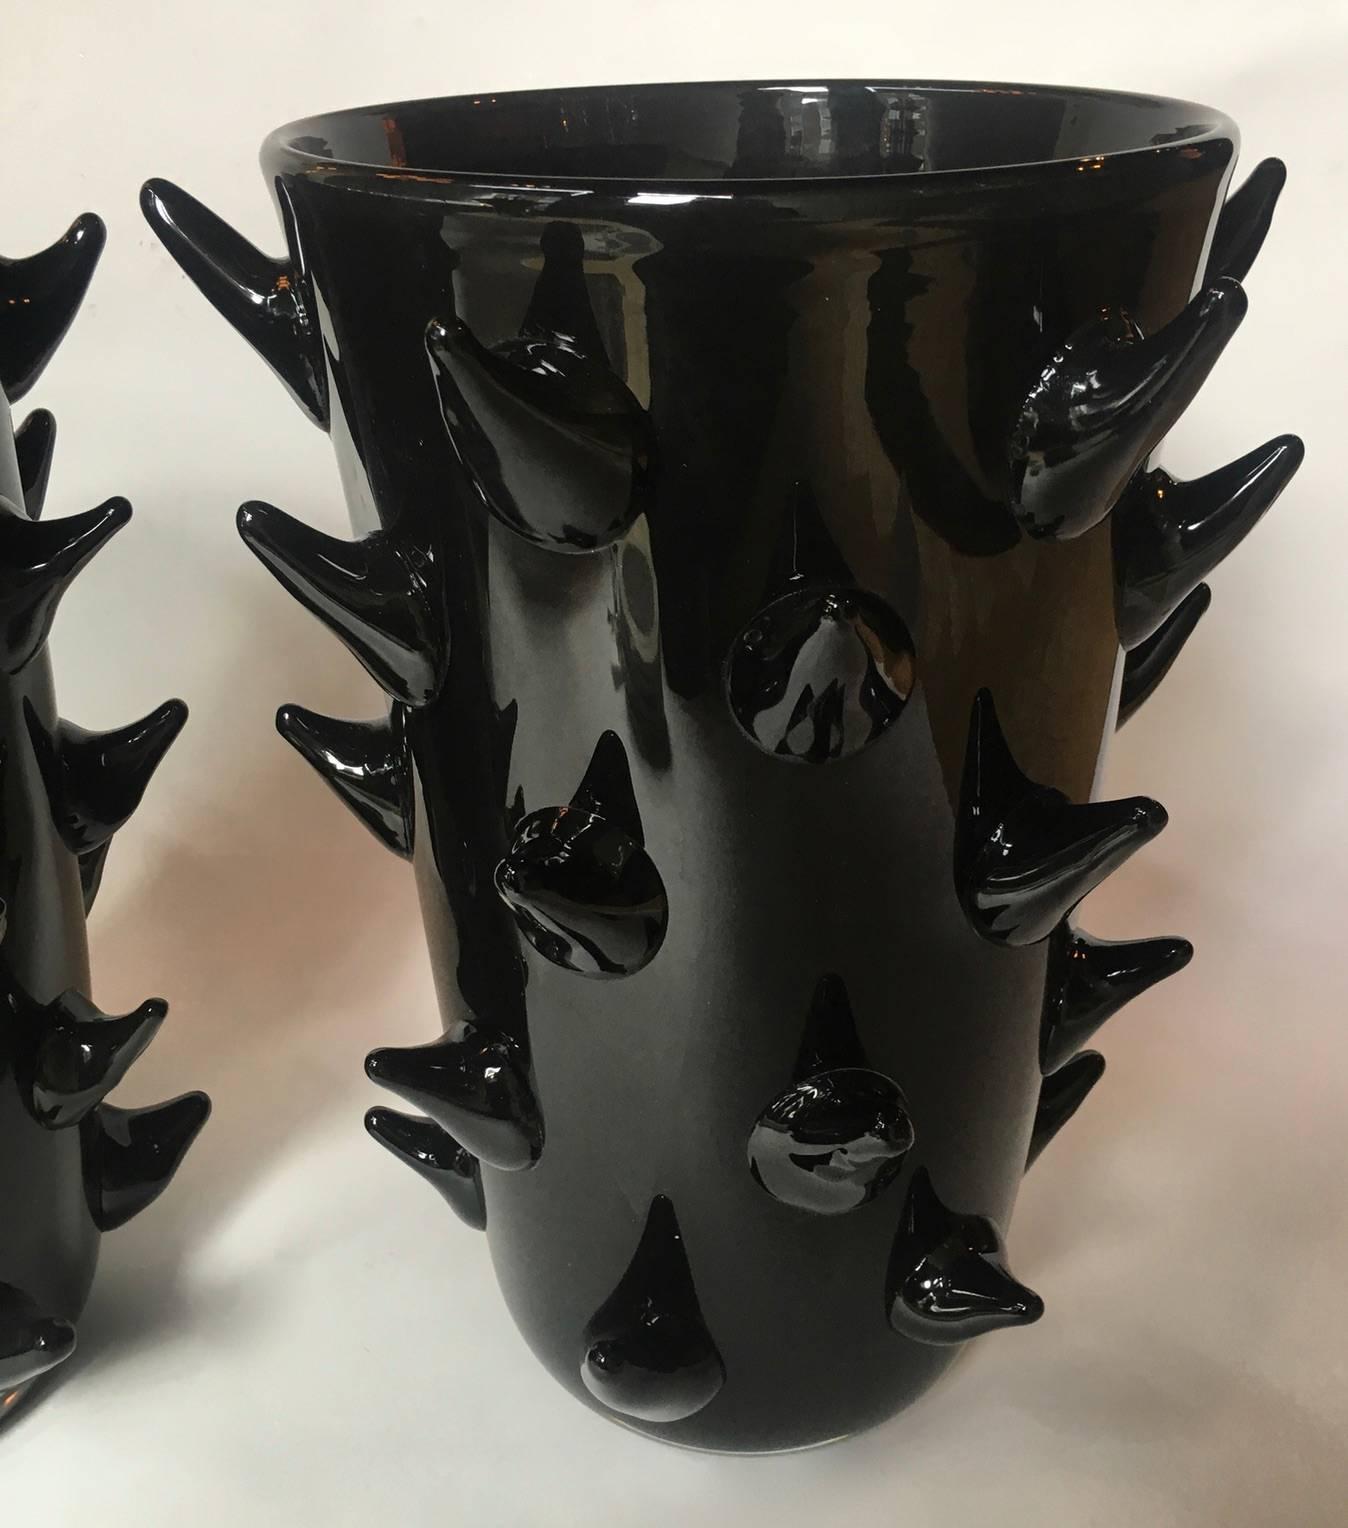 A pair of exquisite Murano Vases by the renowned Murano artist Costantini. Black glass pulled into peaks decorate the outside of the vase. Signature on the bottom of each vase.